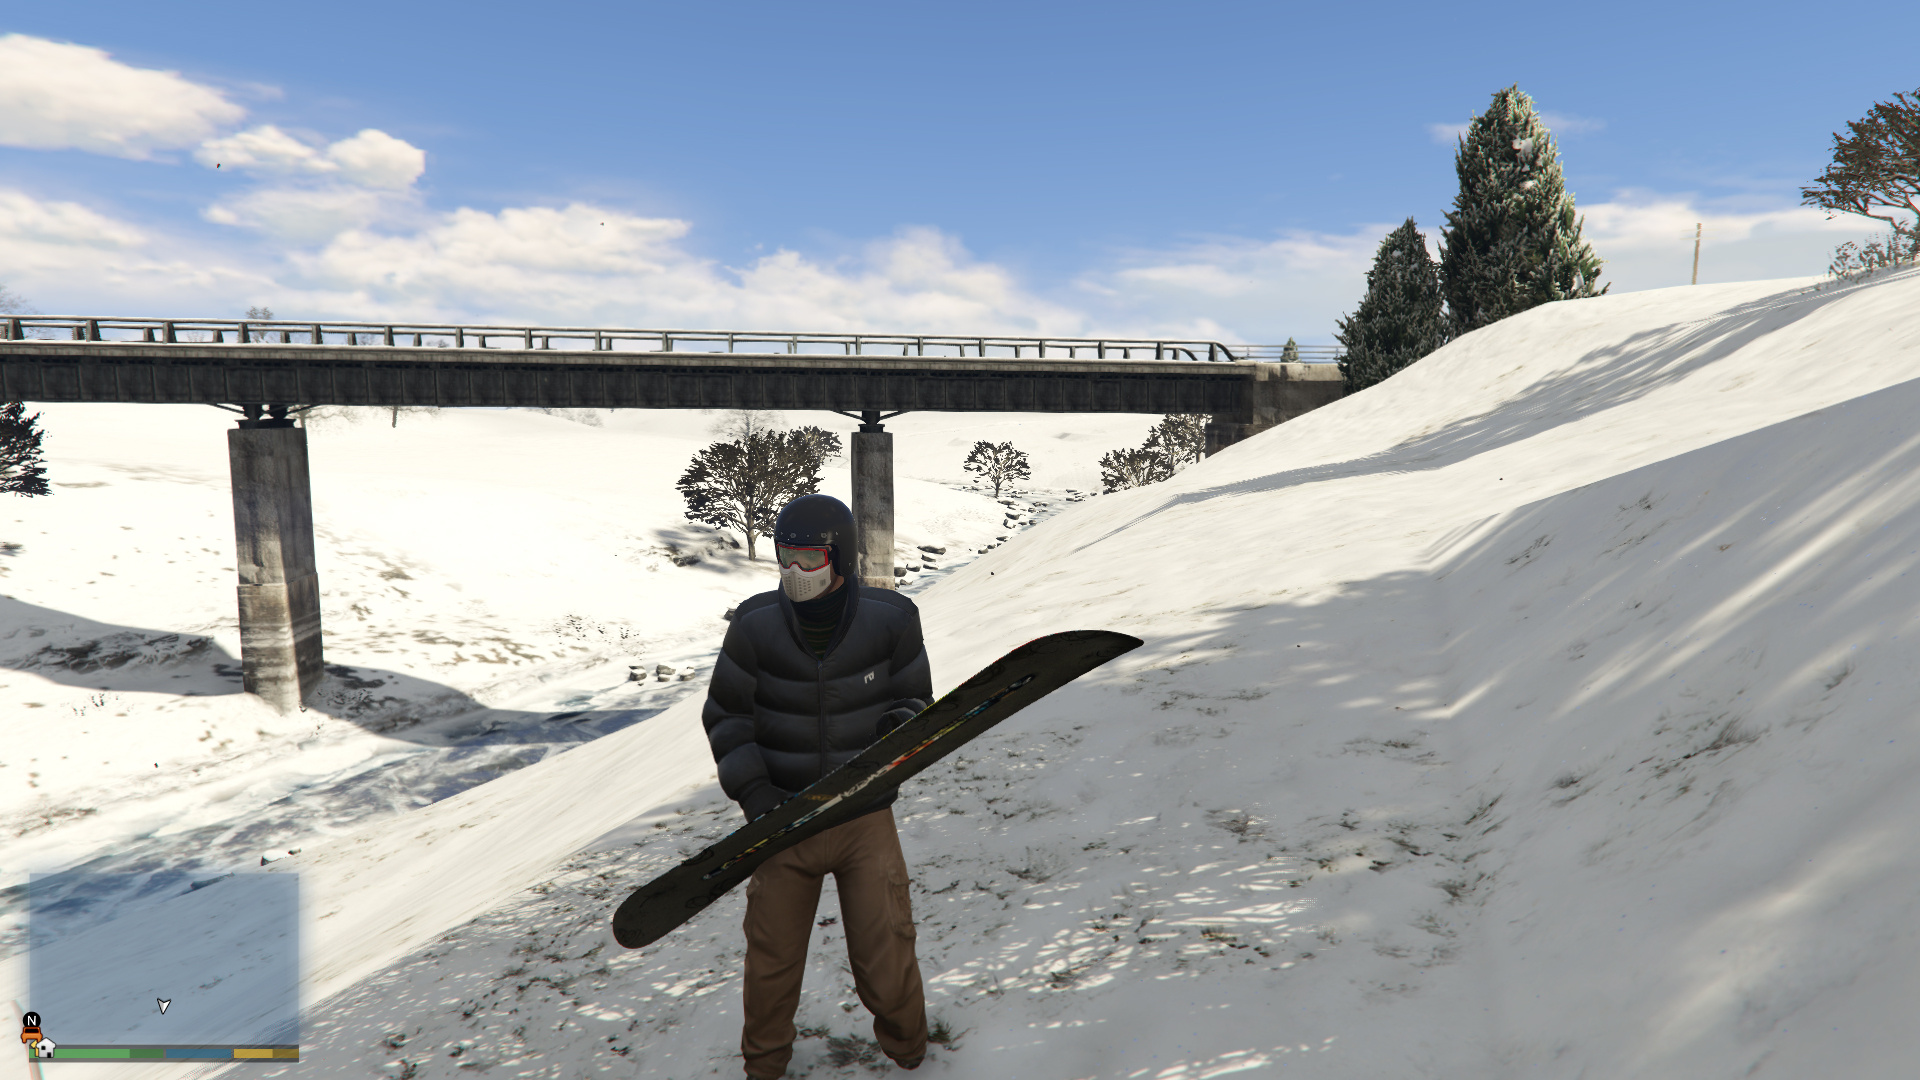 Snowboard Gta5 Mods with The Amazing as well as Interesting how to snowboard in gta 5 pertaining to Your property